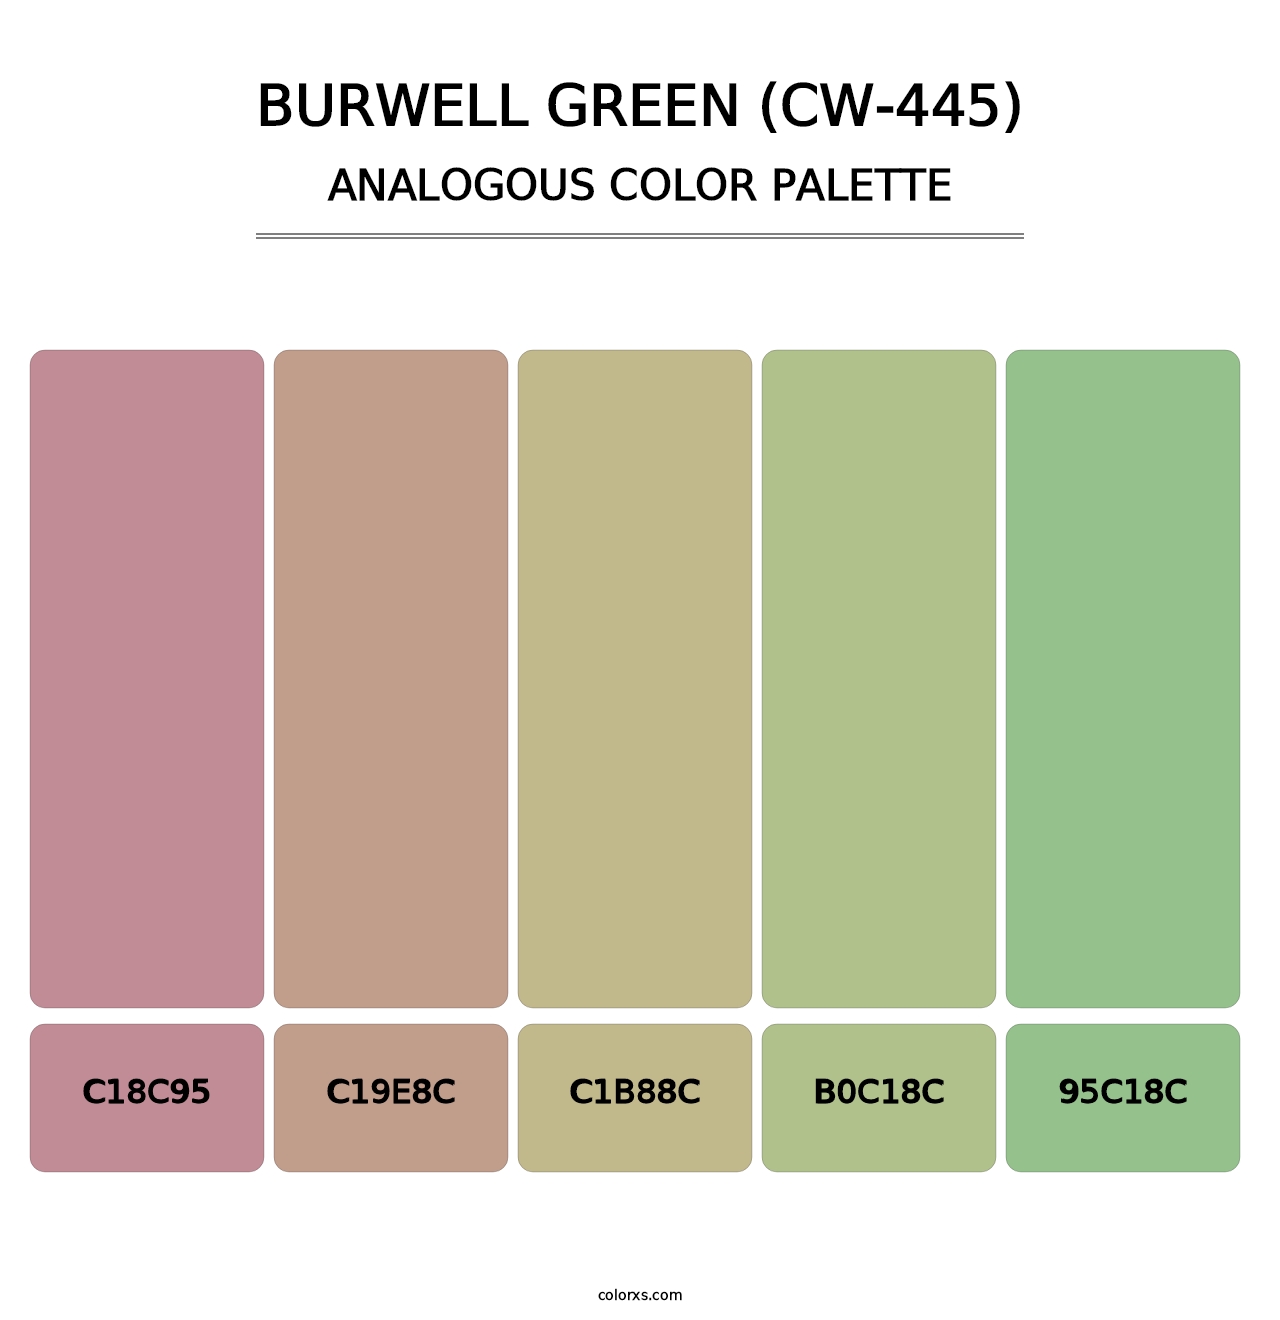 Burwell Green (CW-445) - Analogous Color Palette